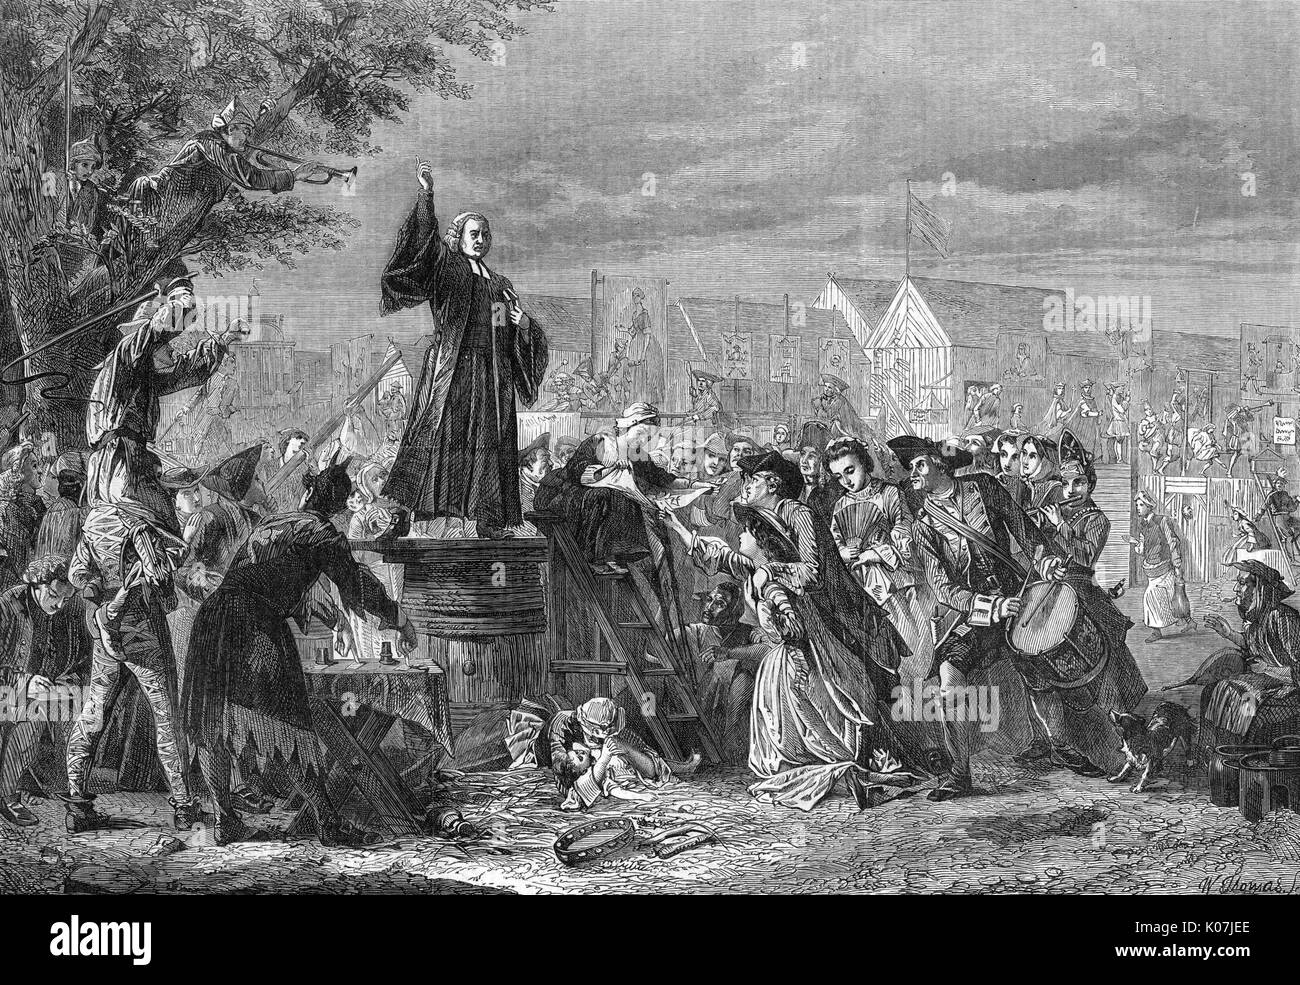 George Whitefield(1714-1770), nonconformist preacher, depicted preaching under difficult circumstances at Moorfields Fair on Whit Monday, 1742.  1742 Stock Photo